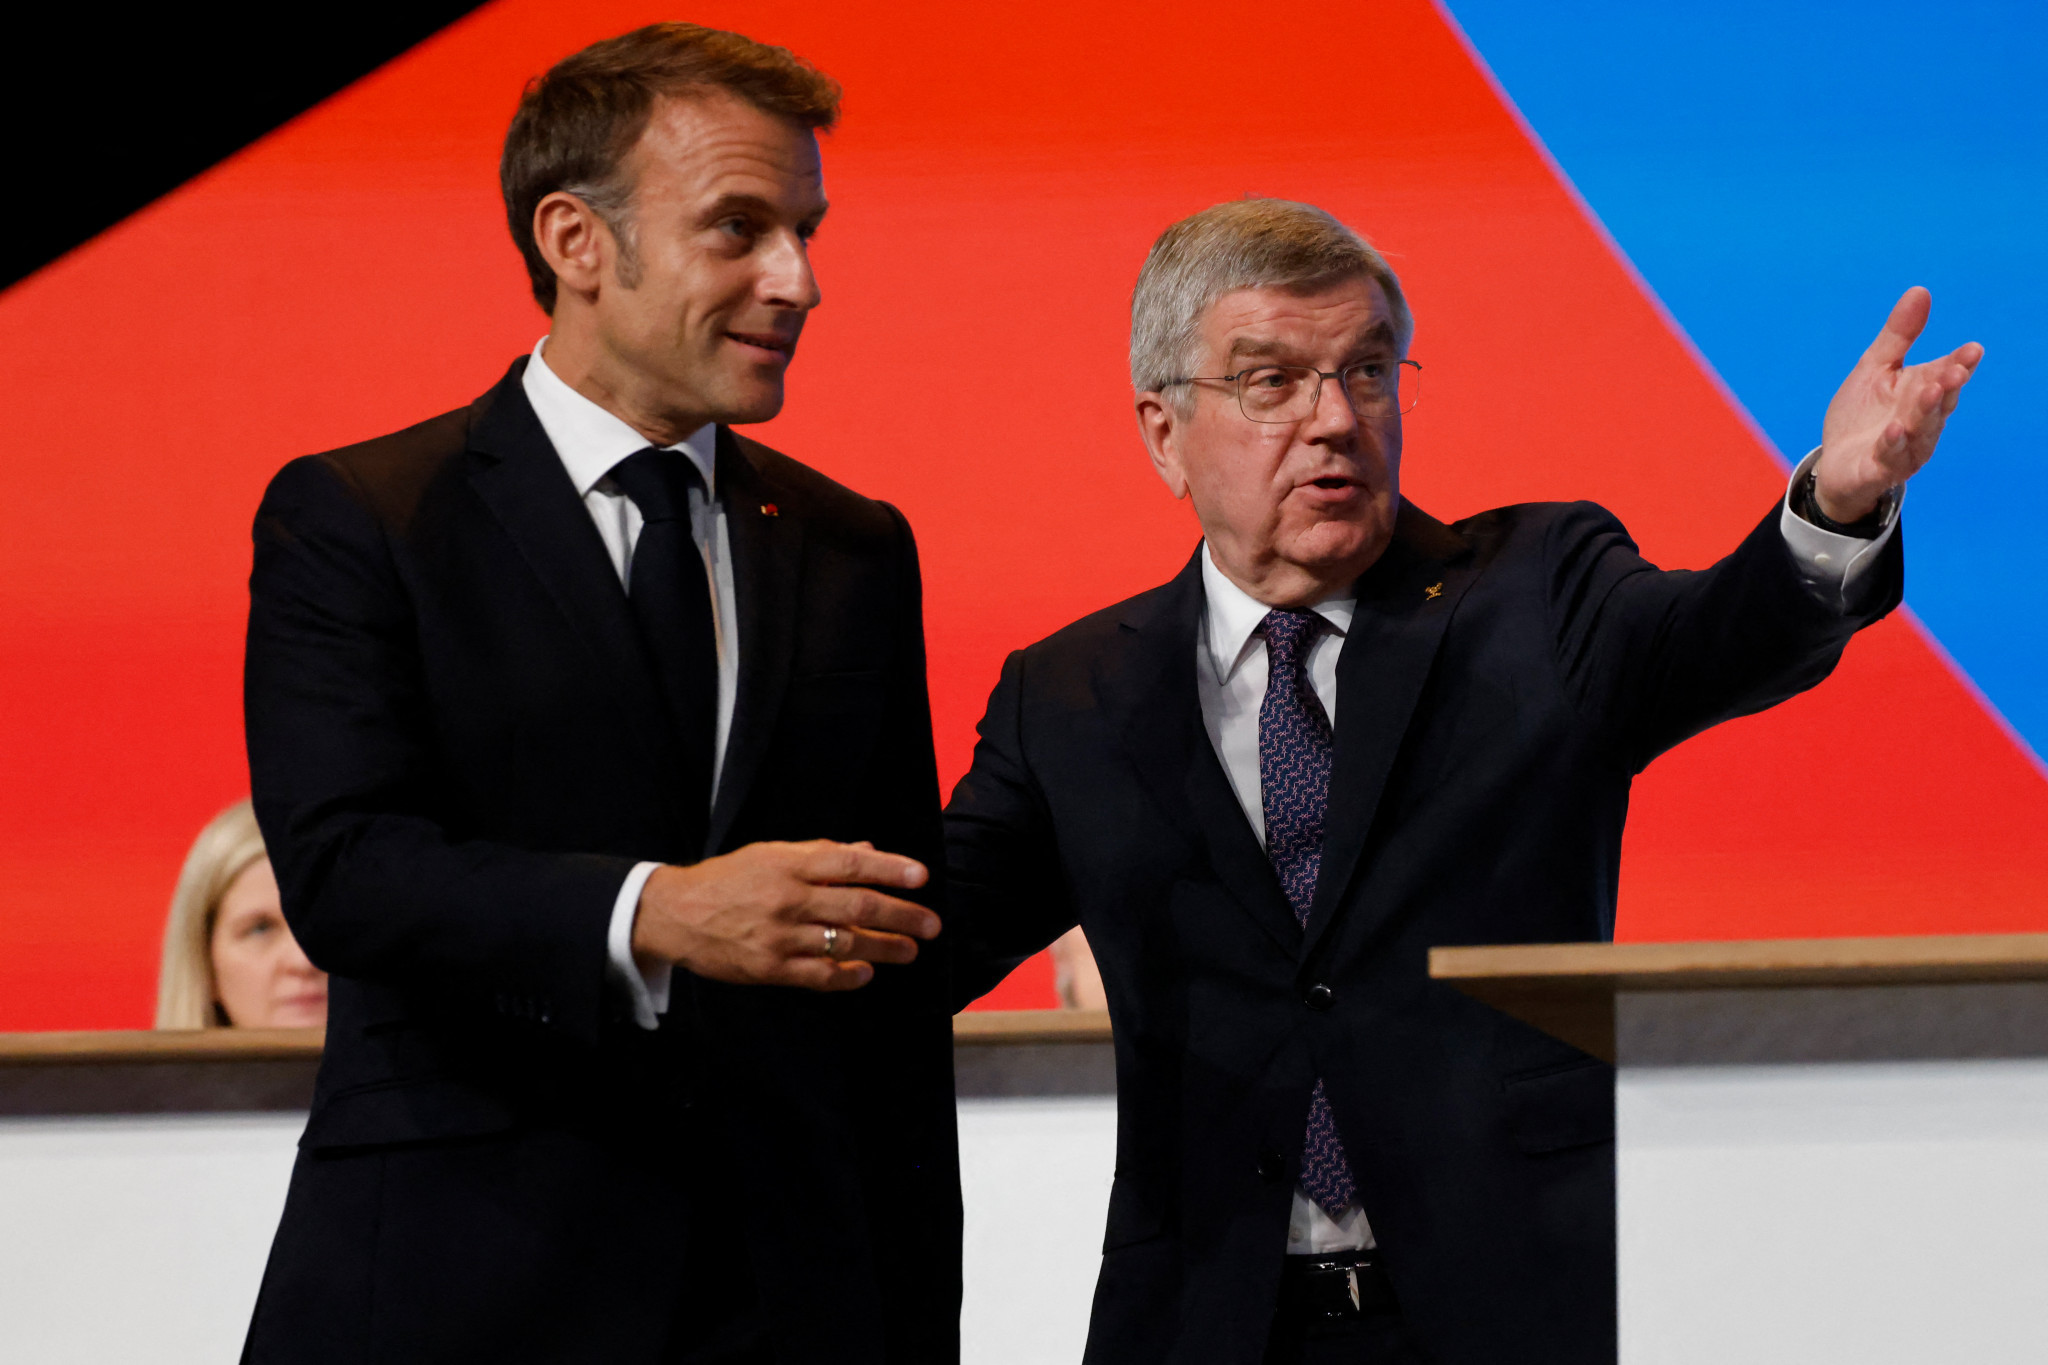 French president Emmanuel Macron and IOC President Thomas Bach. GETTY IMAGES